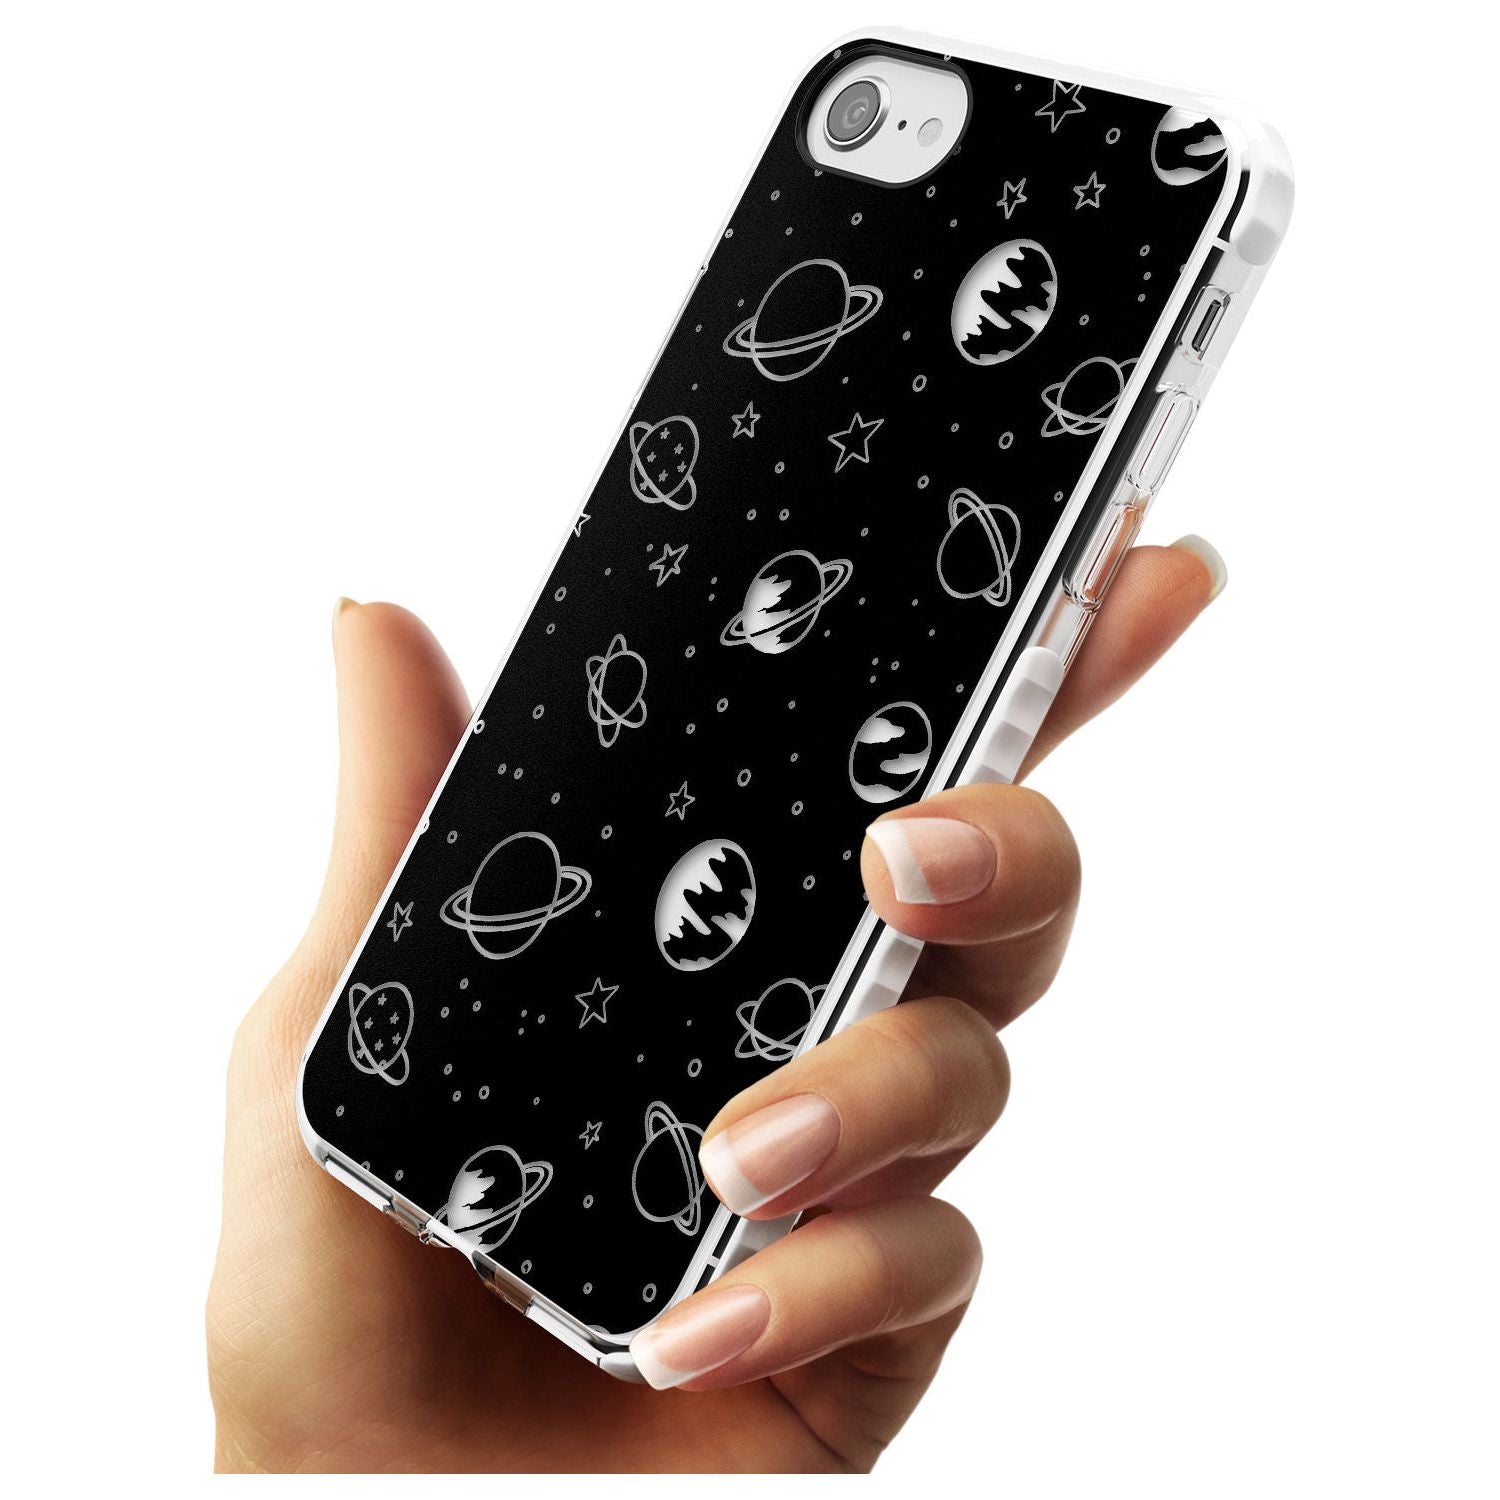 Outer Space Outlines: Clear on Black Slim TPU Phone Case for iPhone SE 8 7 Plus